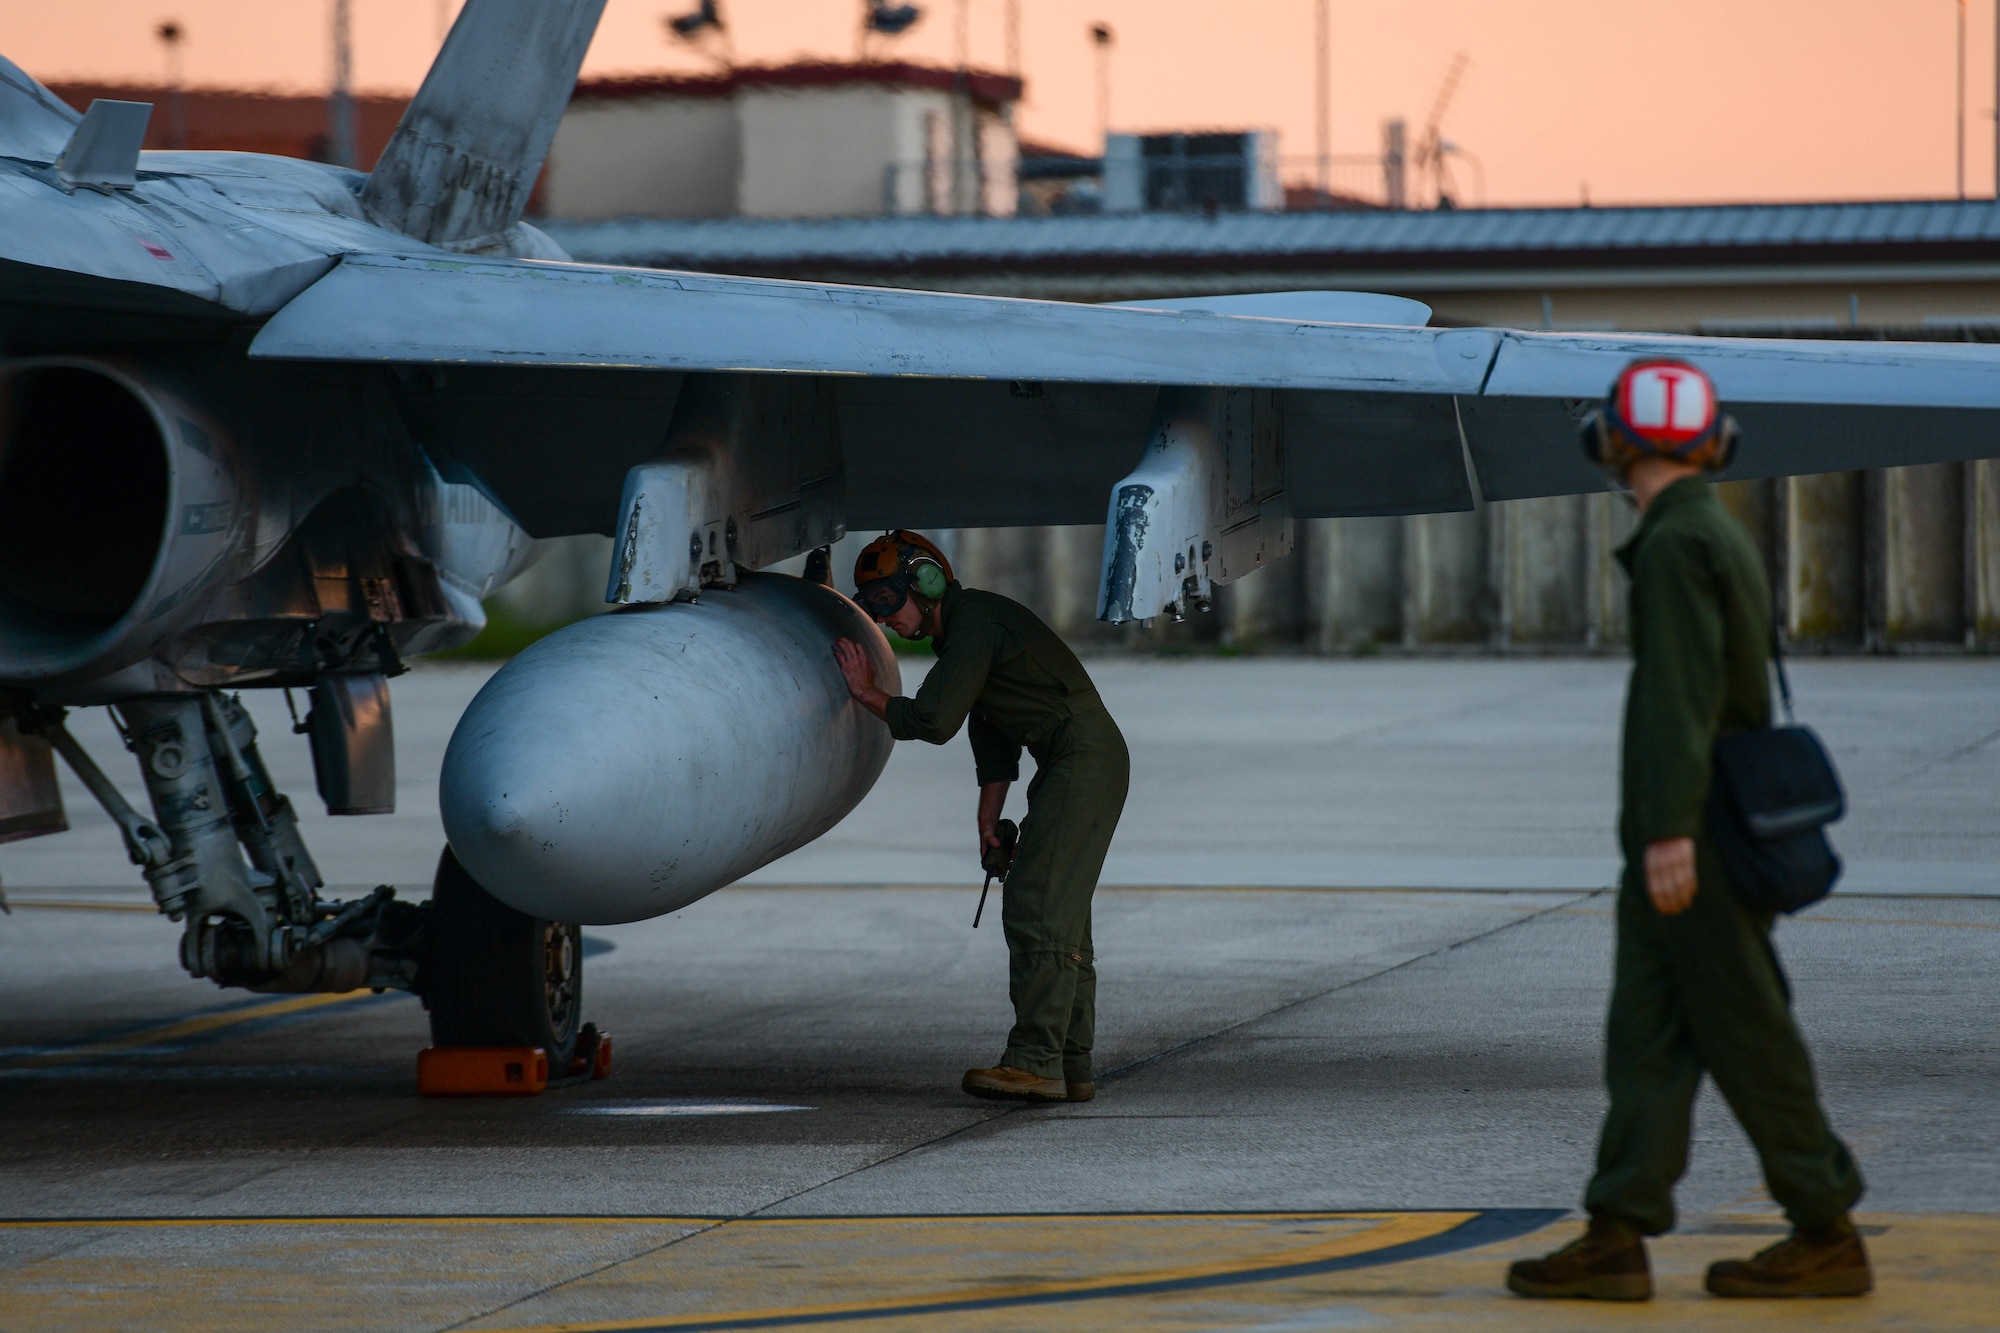 United States Marine Corps F/A-18 fixed-wing aircraft mechanics prepare an F/A-18 Hornet assigned to the Marine Fighter Attack Squadron 323 based out of Marine Corps Air Station Miramar, California, for flight at Aviano Air Base, Italy, Sept. 20, 2022. Fixed-wing aircraft mechanics inspect and maintain aircraft airframes and airframe components as well as perform additional duties relating to flightline operations. (U.S. Air Force photo by Senior Airman Brooke Moeder)